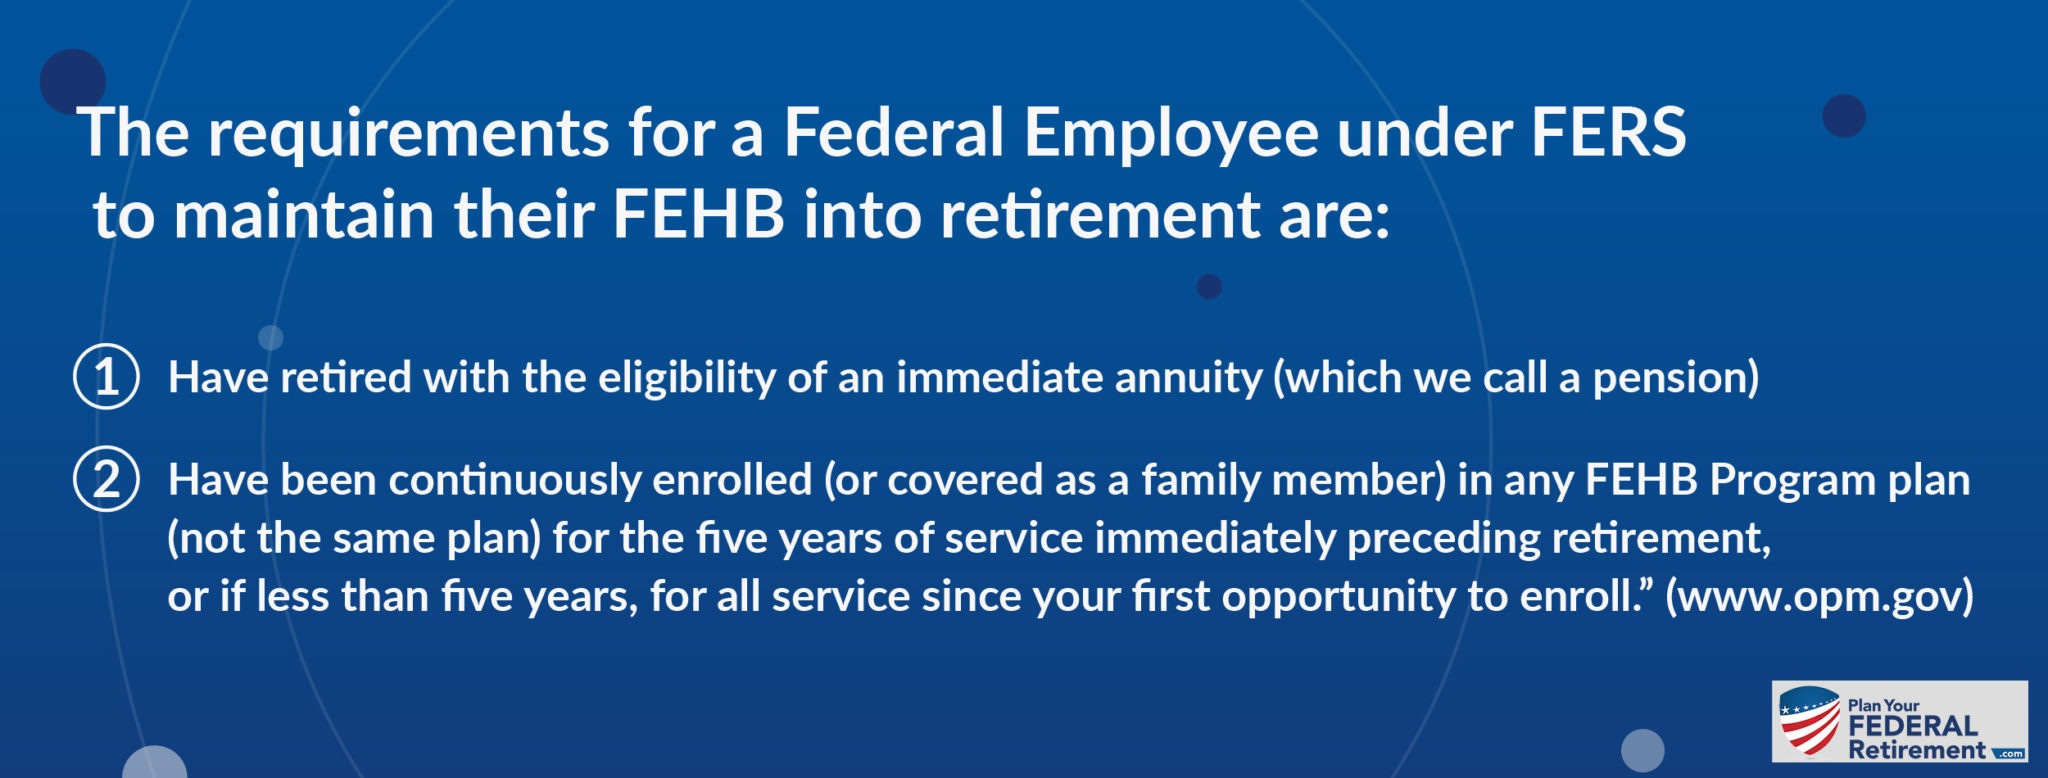 FEHB in Retirement Plan Your Federal Retirement